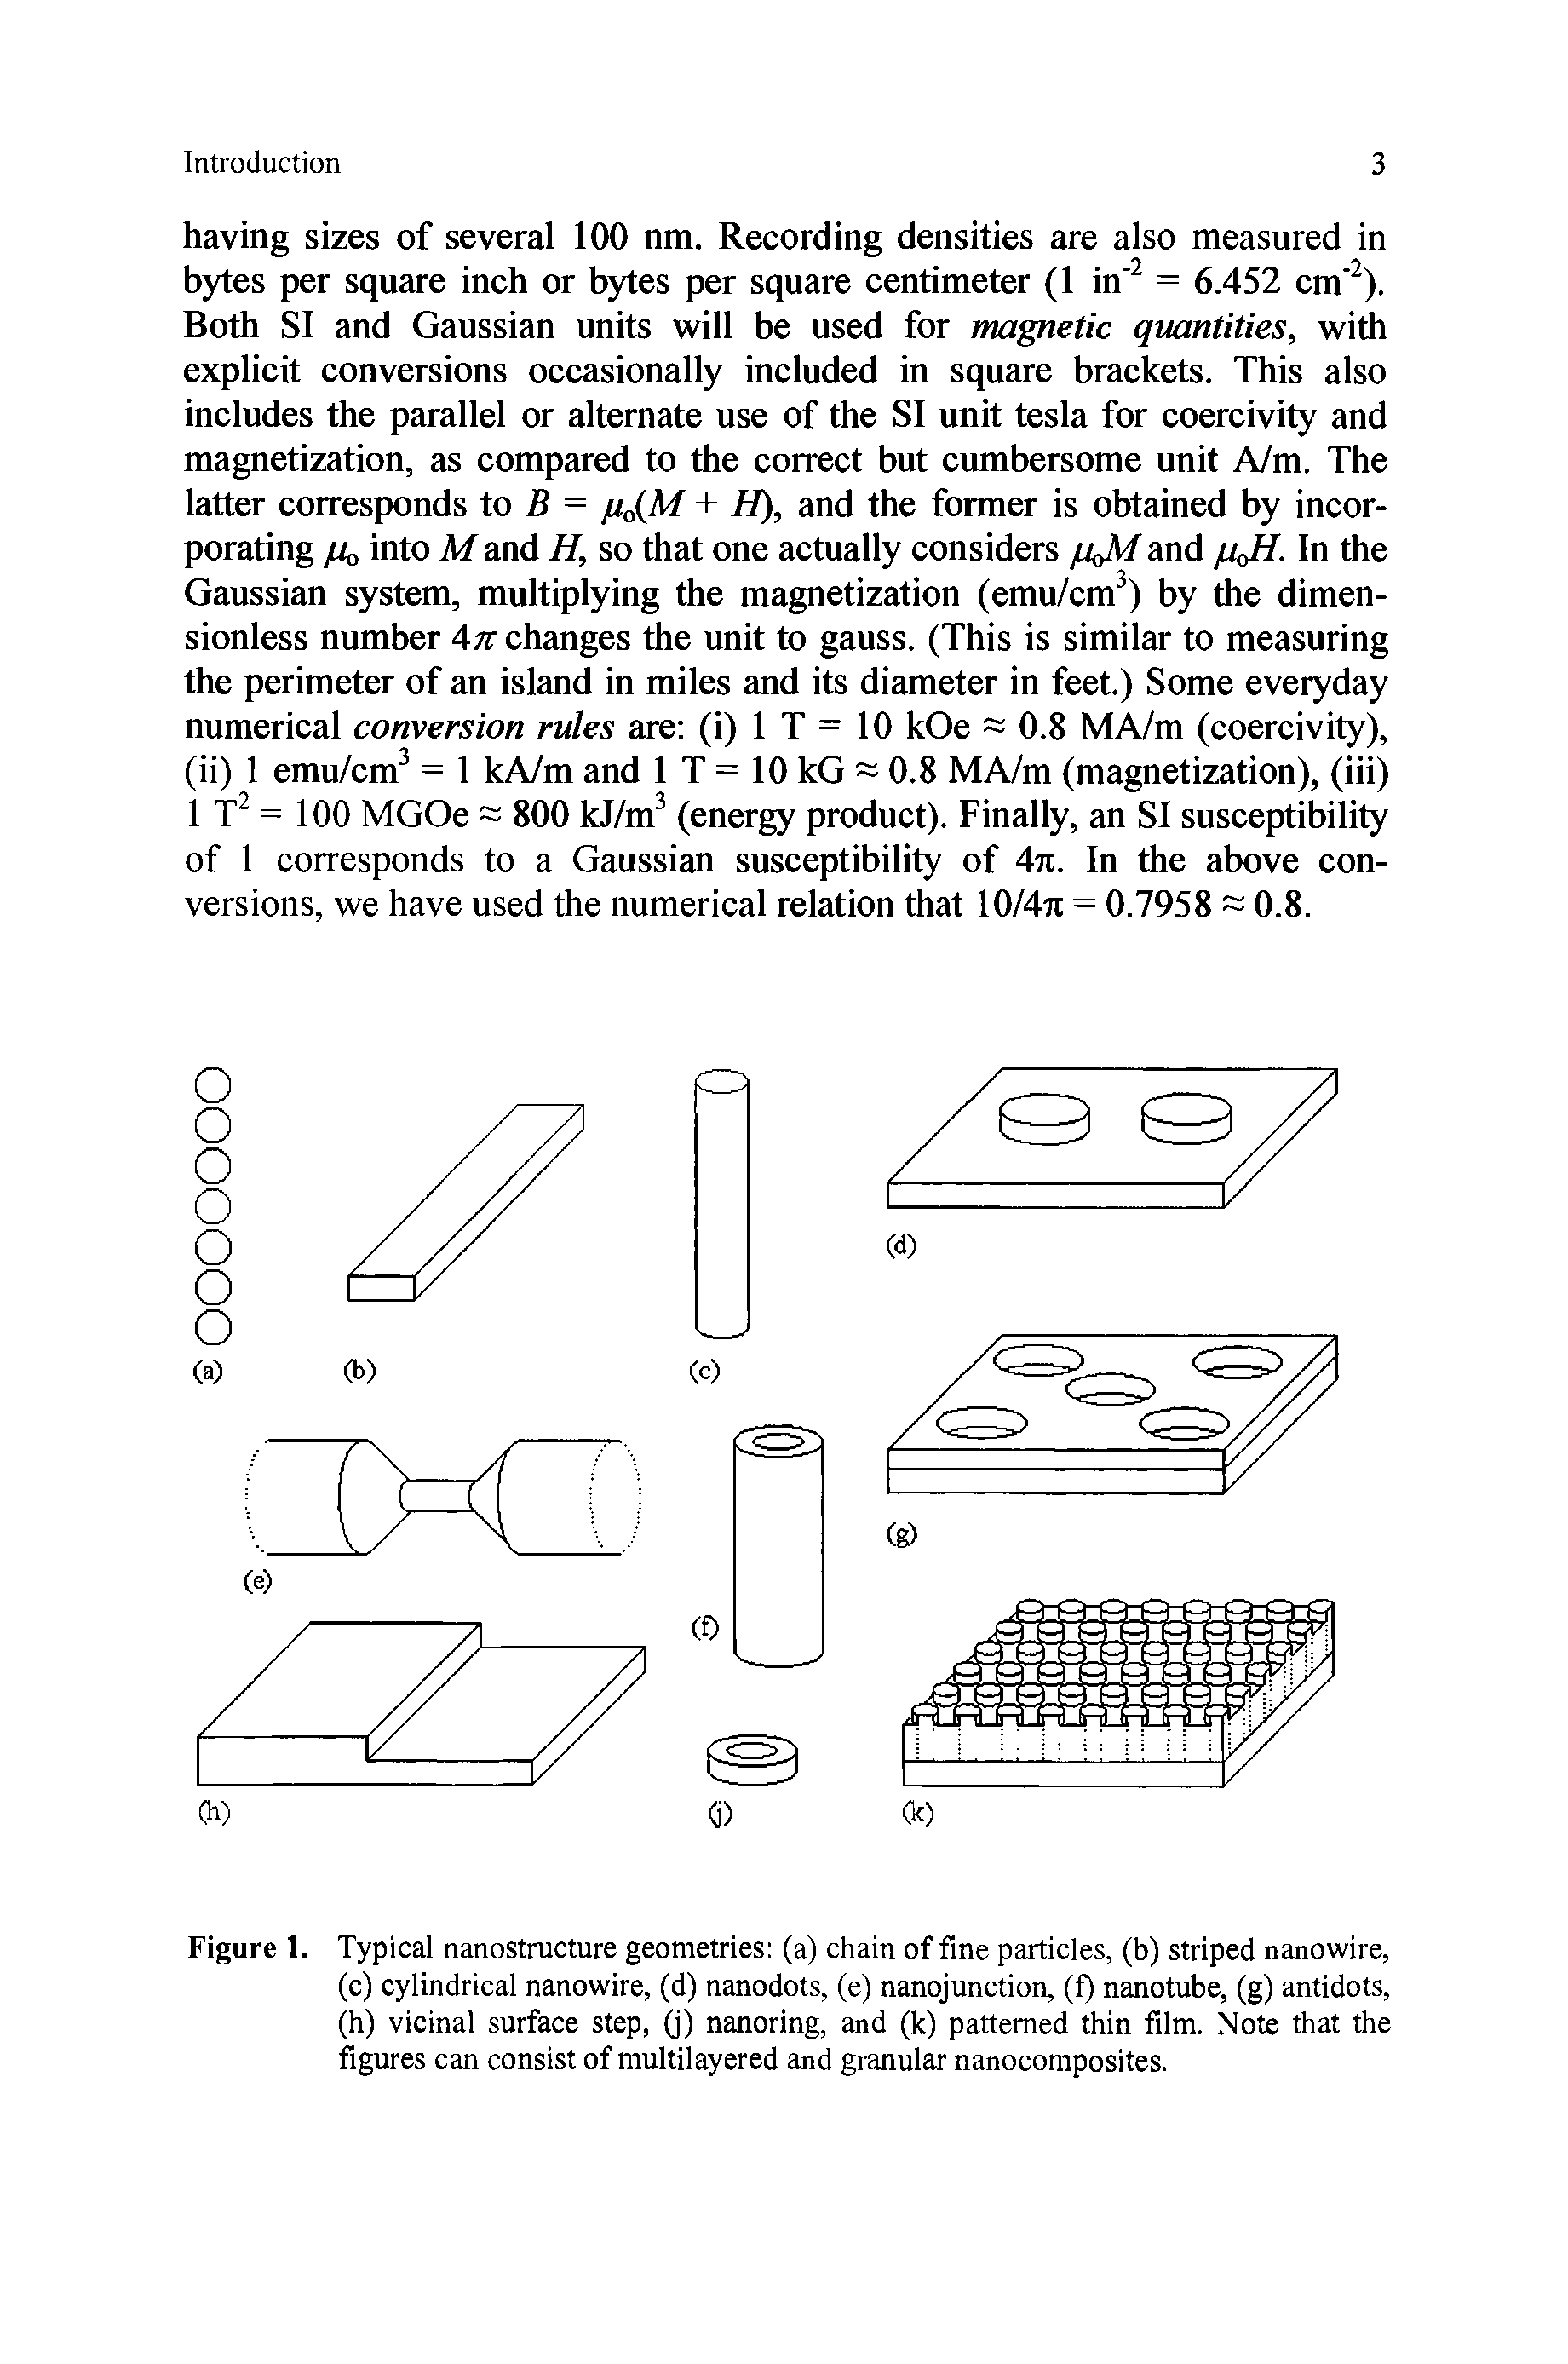 Figure 1. Typical nanostructure geometries (a) chain of fine particles, (b) striped nanowire, (c) cylindrical nanowire, (d) nanodots, (e) nanojunction, (f) nanotube, (g) antidots, (h) vicinal surface step, (j) nanoring, and (k) patterned thin film. Note that the figures can consist of multilayered and granular nanocomposites.